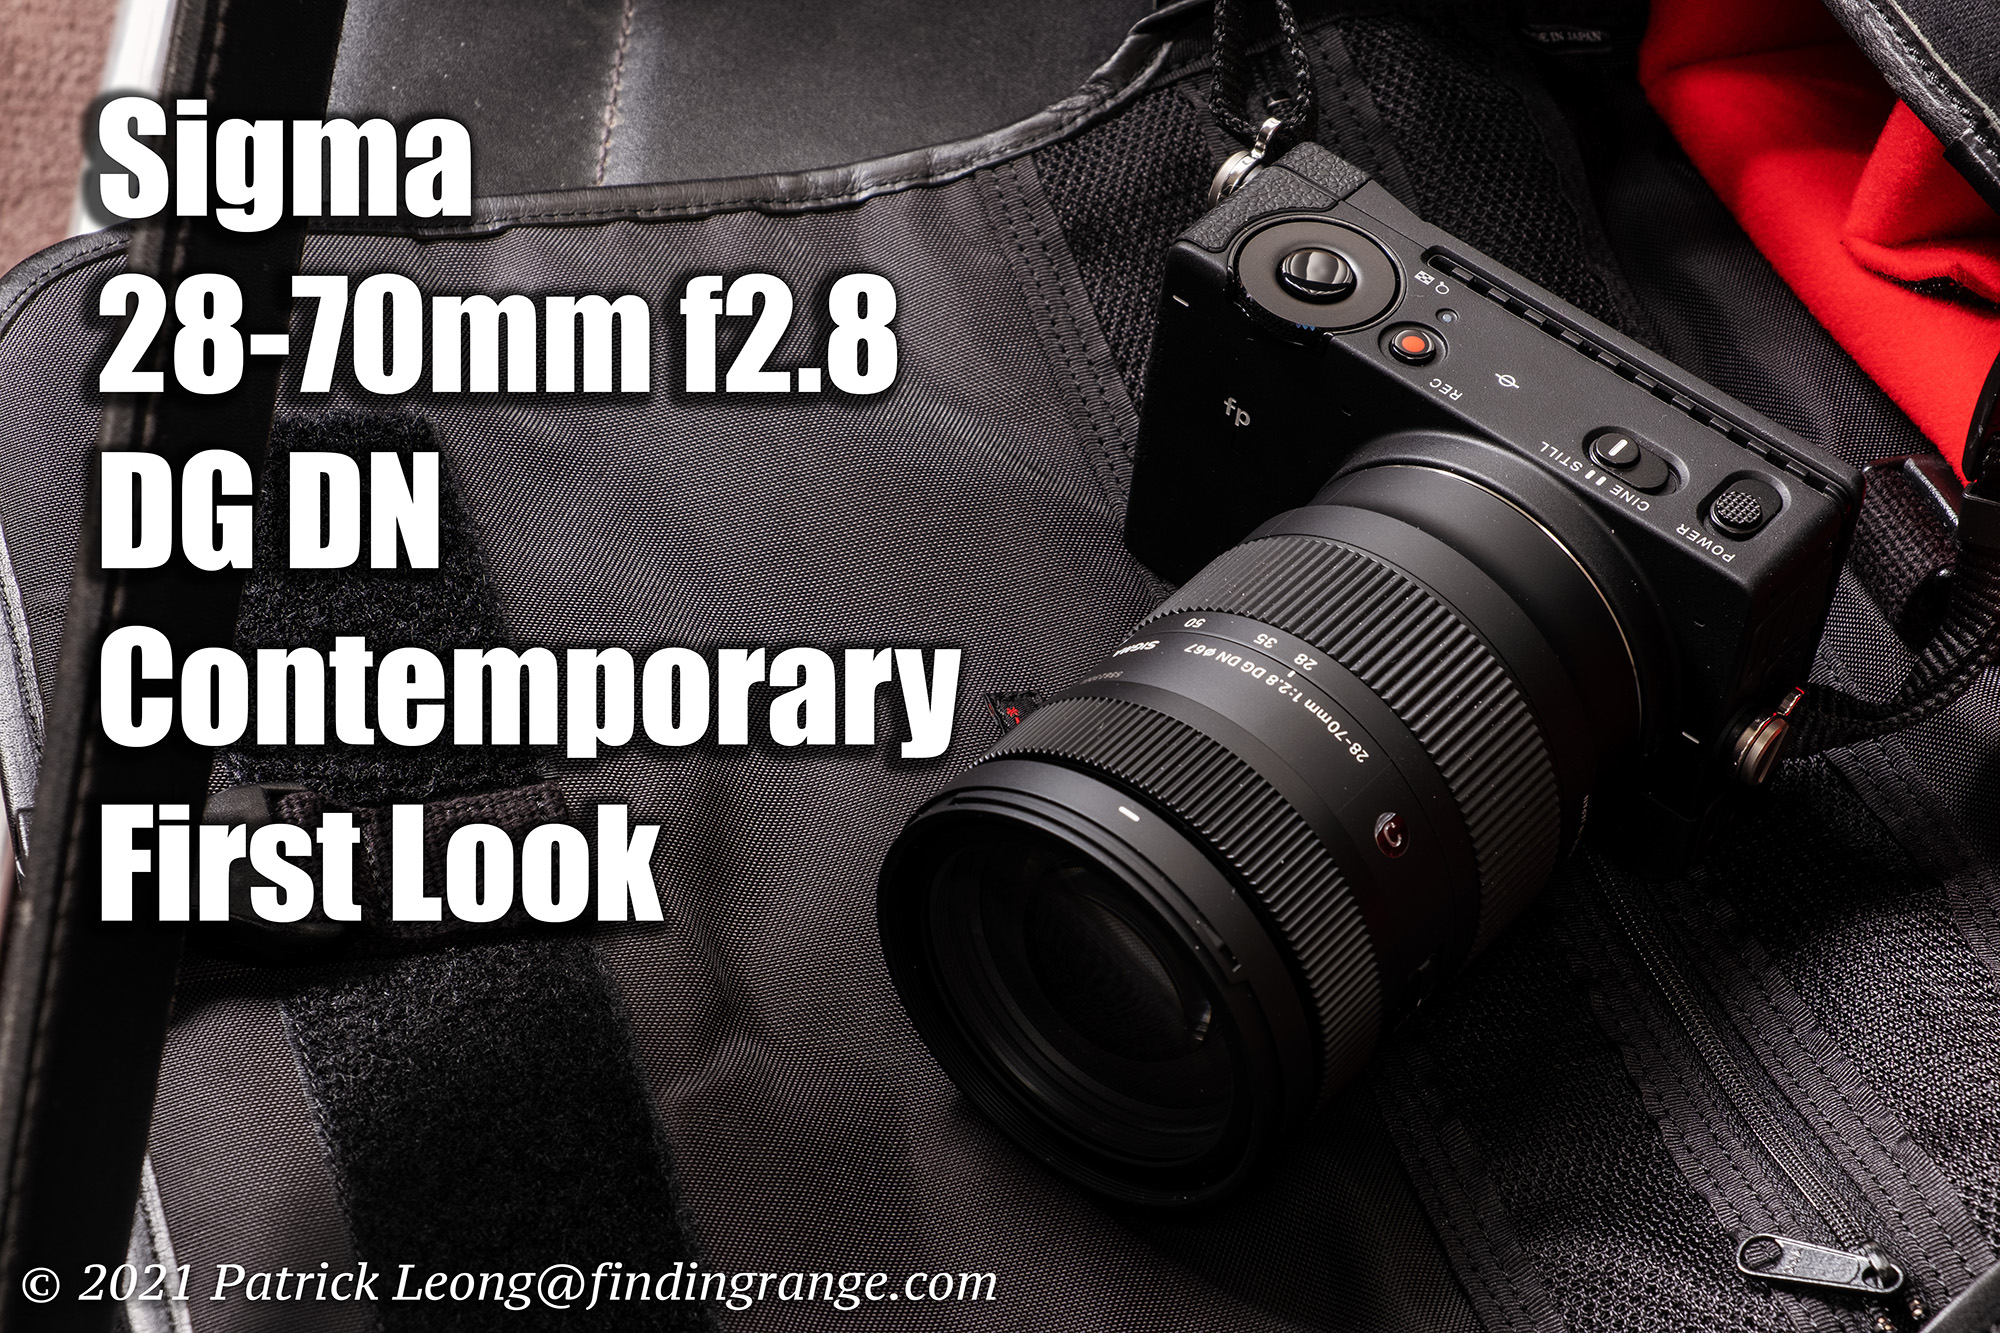 Sigma 28-70mm f2.8 DG DN Contemporary First Look - Finding Range